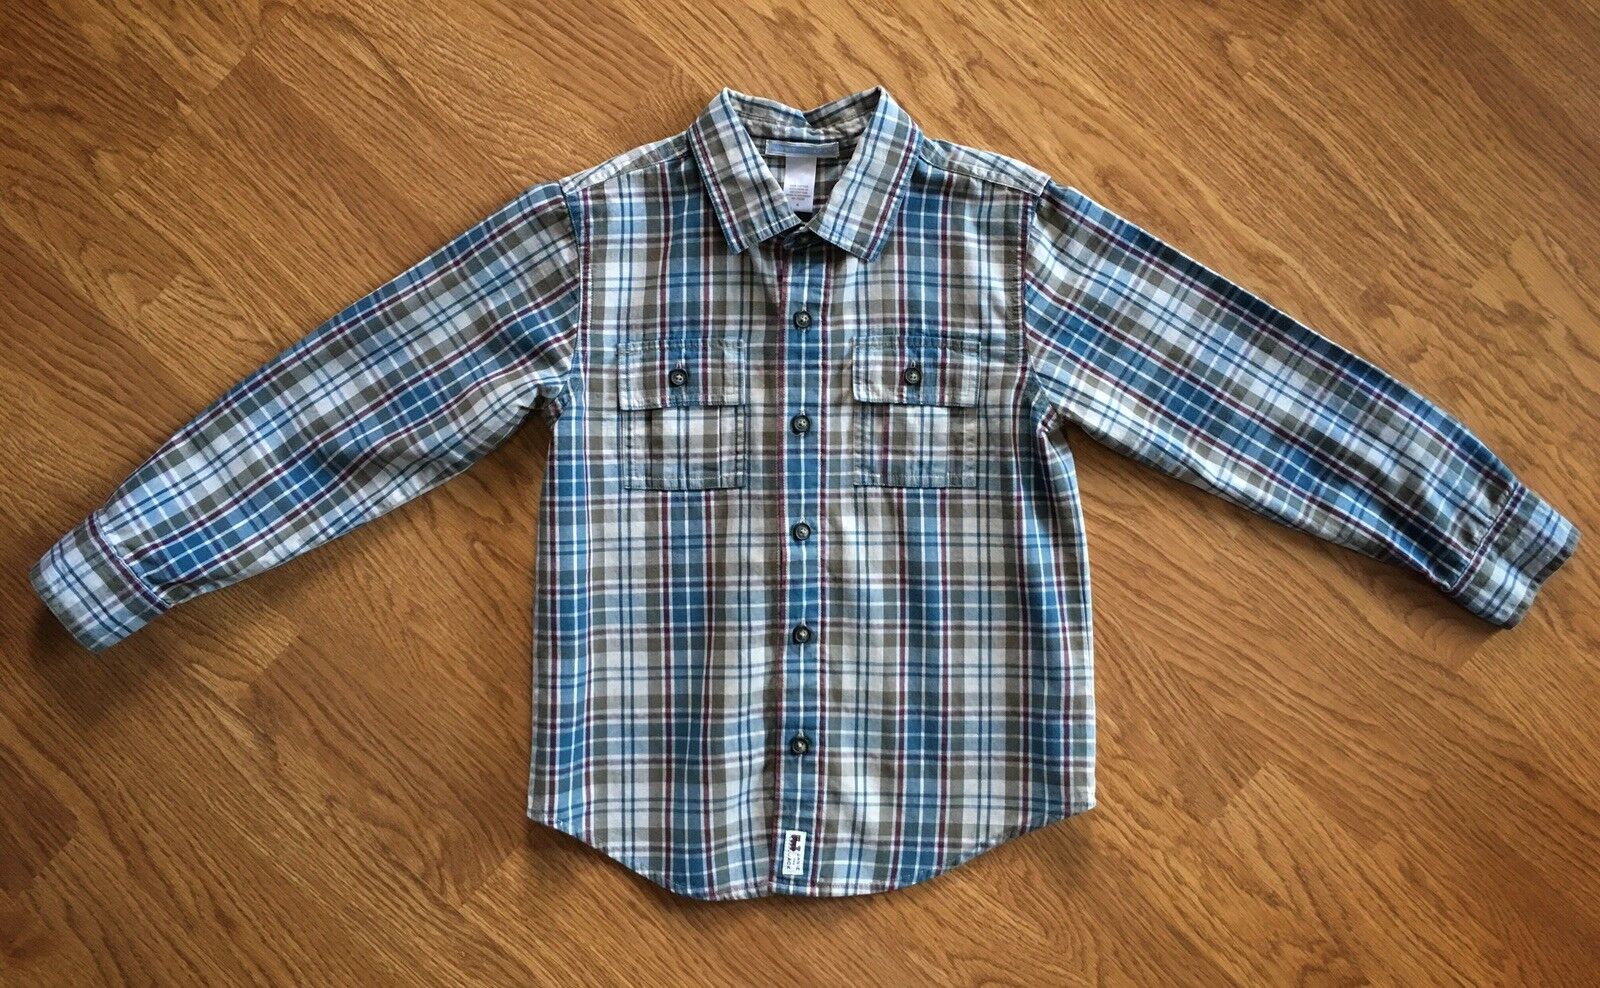 Janie and Jack boys button-down shirt size 6, classic blue tan red plaid holiday